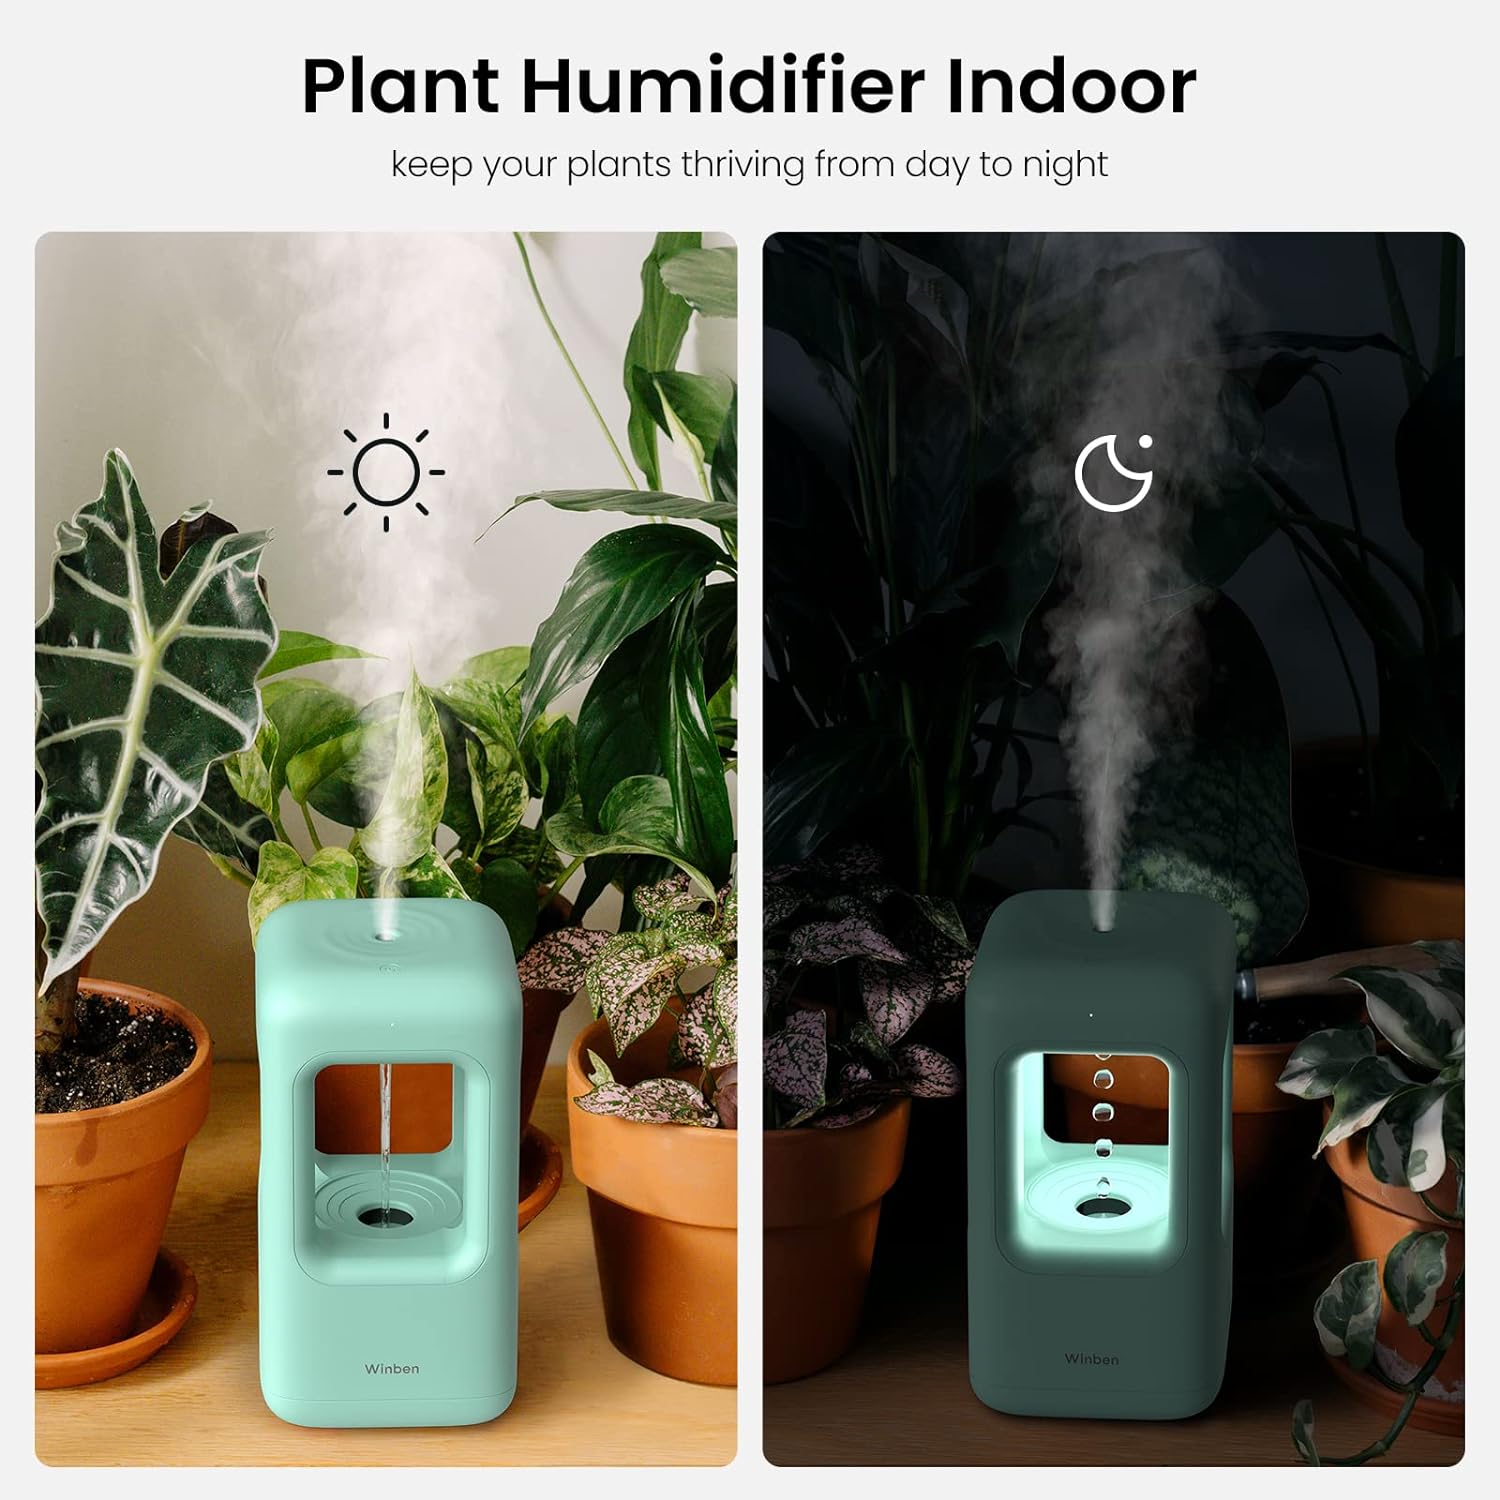 winben Humidifiers for Bedroom, Small Air Humidifier for Home Baby Nursery Indoor Plants, Quiet Ultrasonic Cool Mist for Large Room Office, 600ml Mini Cute Anti-Gravity Design, Easy to Clean, Blue